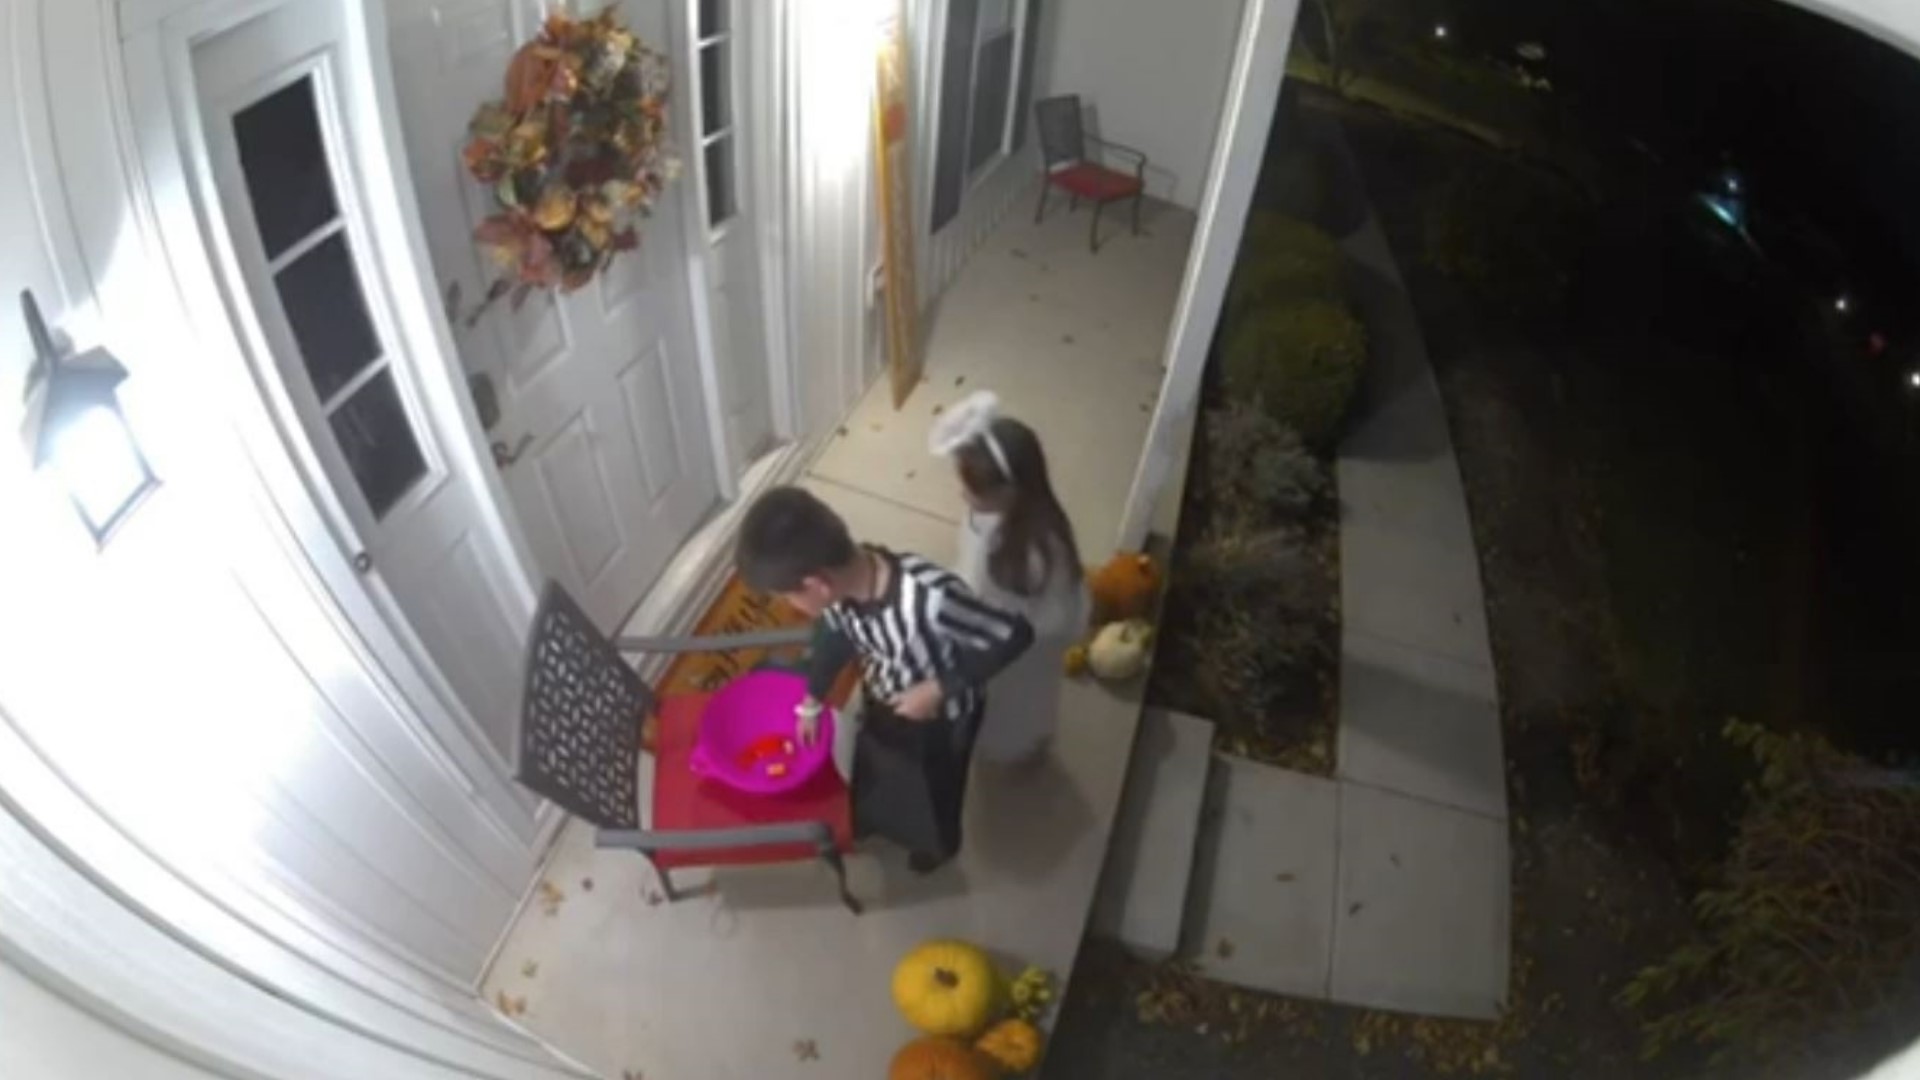 Wednesday evening, Harrison White, 8, played in his front yard with his 5-year-old sister, Charity, not realizing that he just gave us all exactly what we needed.